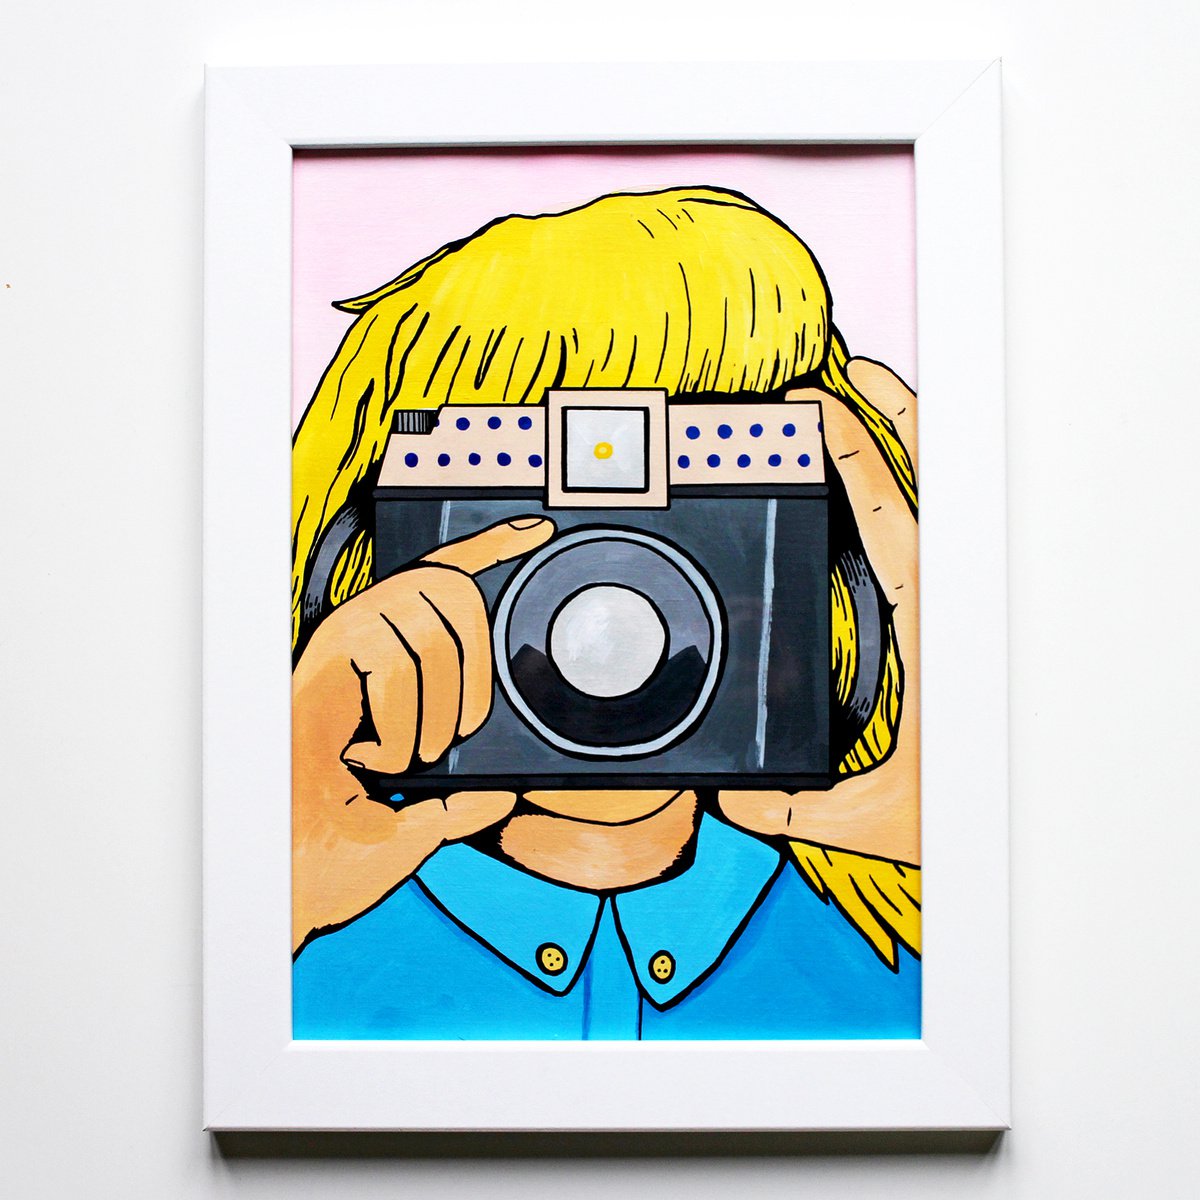 Snap! Retro Camera Pop Painting on Unframed A4 Paper by Ian Viggars